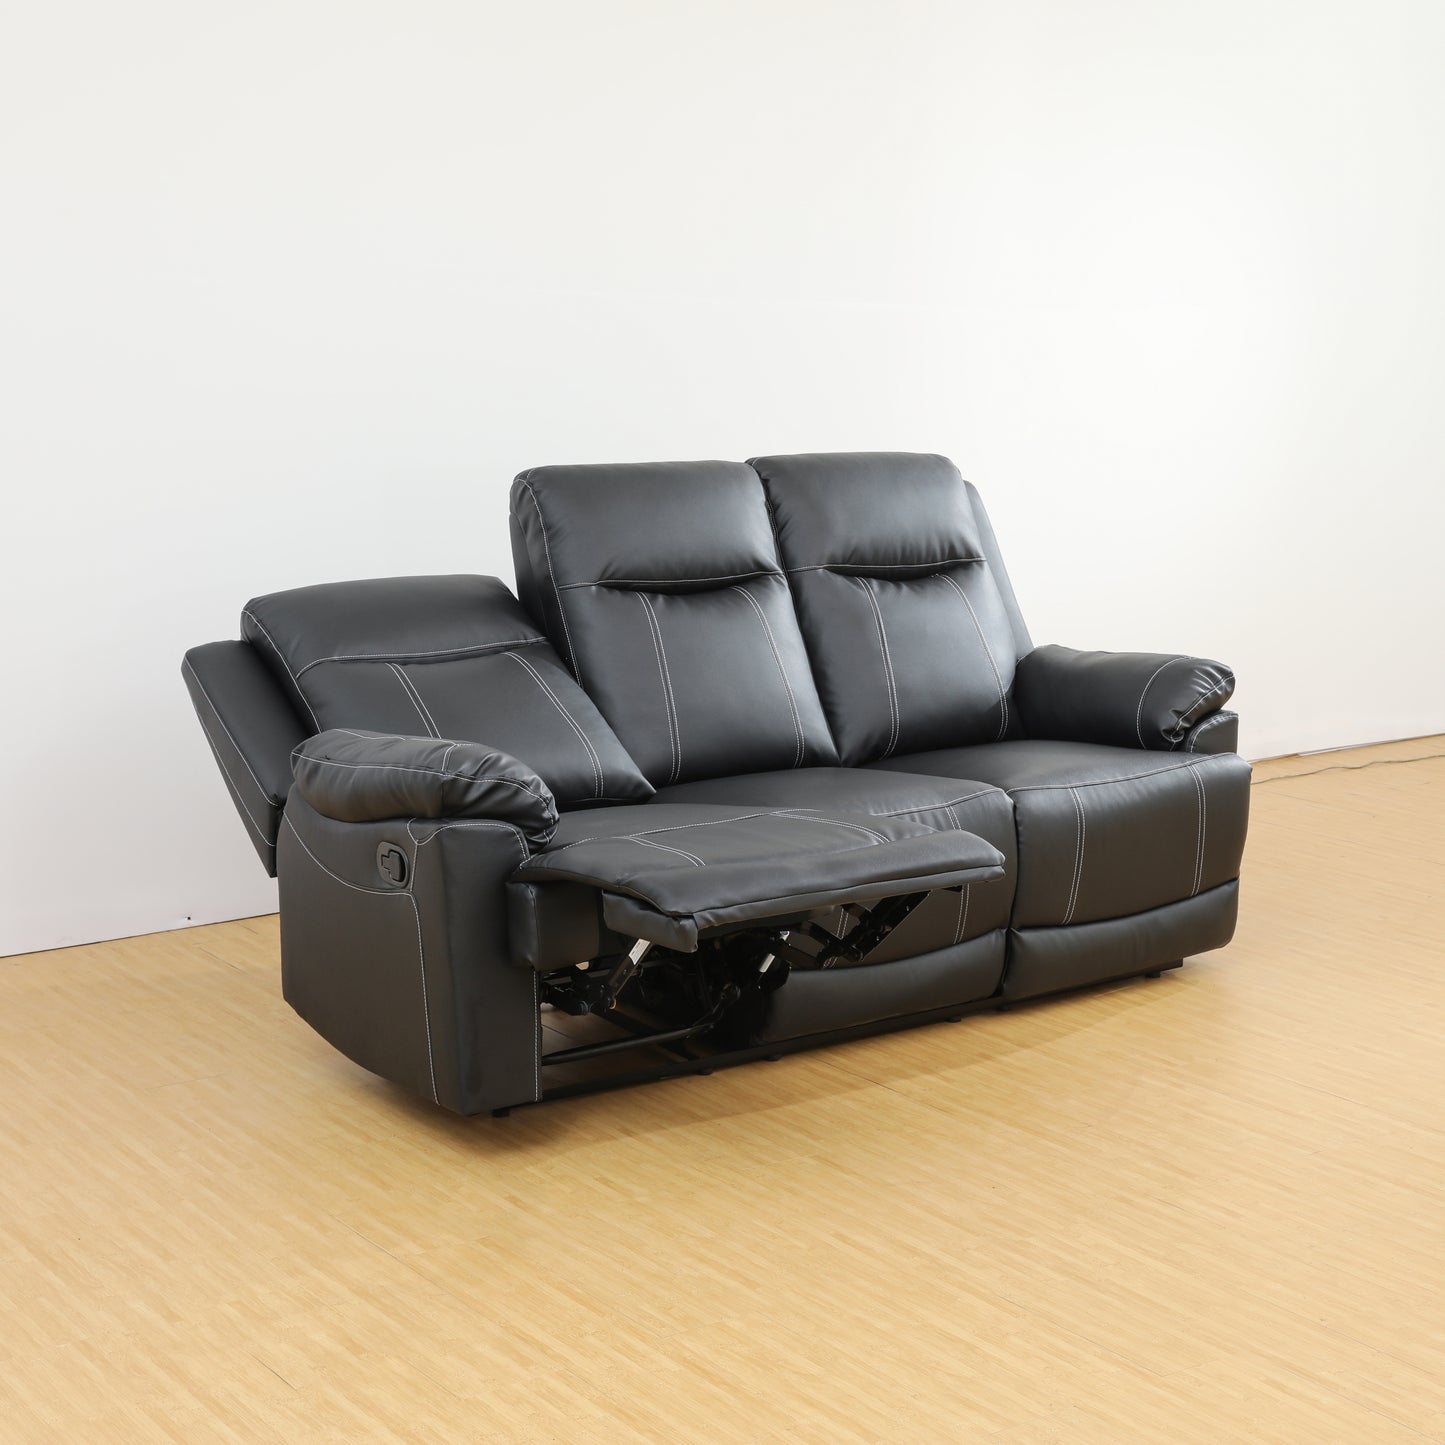 3-Seater Sofa: Recliner Chaise, 2 Cup Holders, Armrests, Black